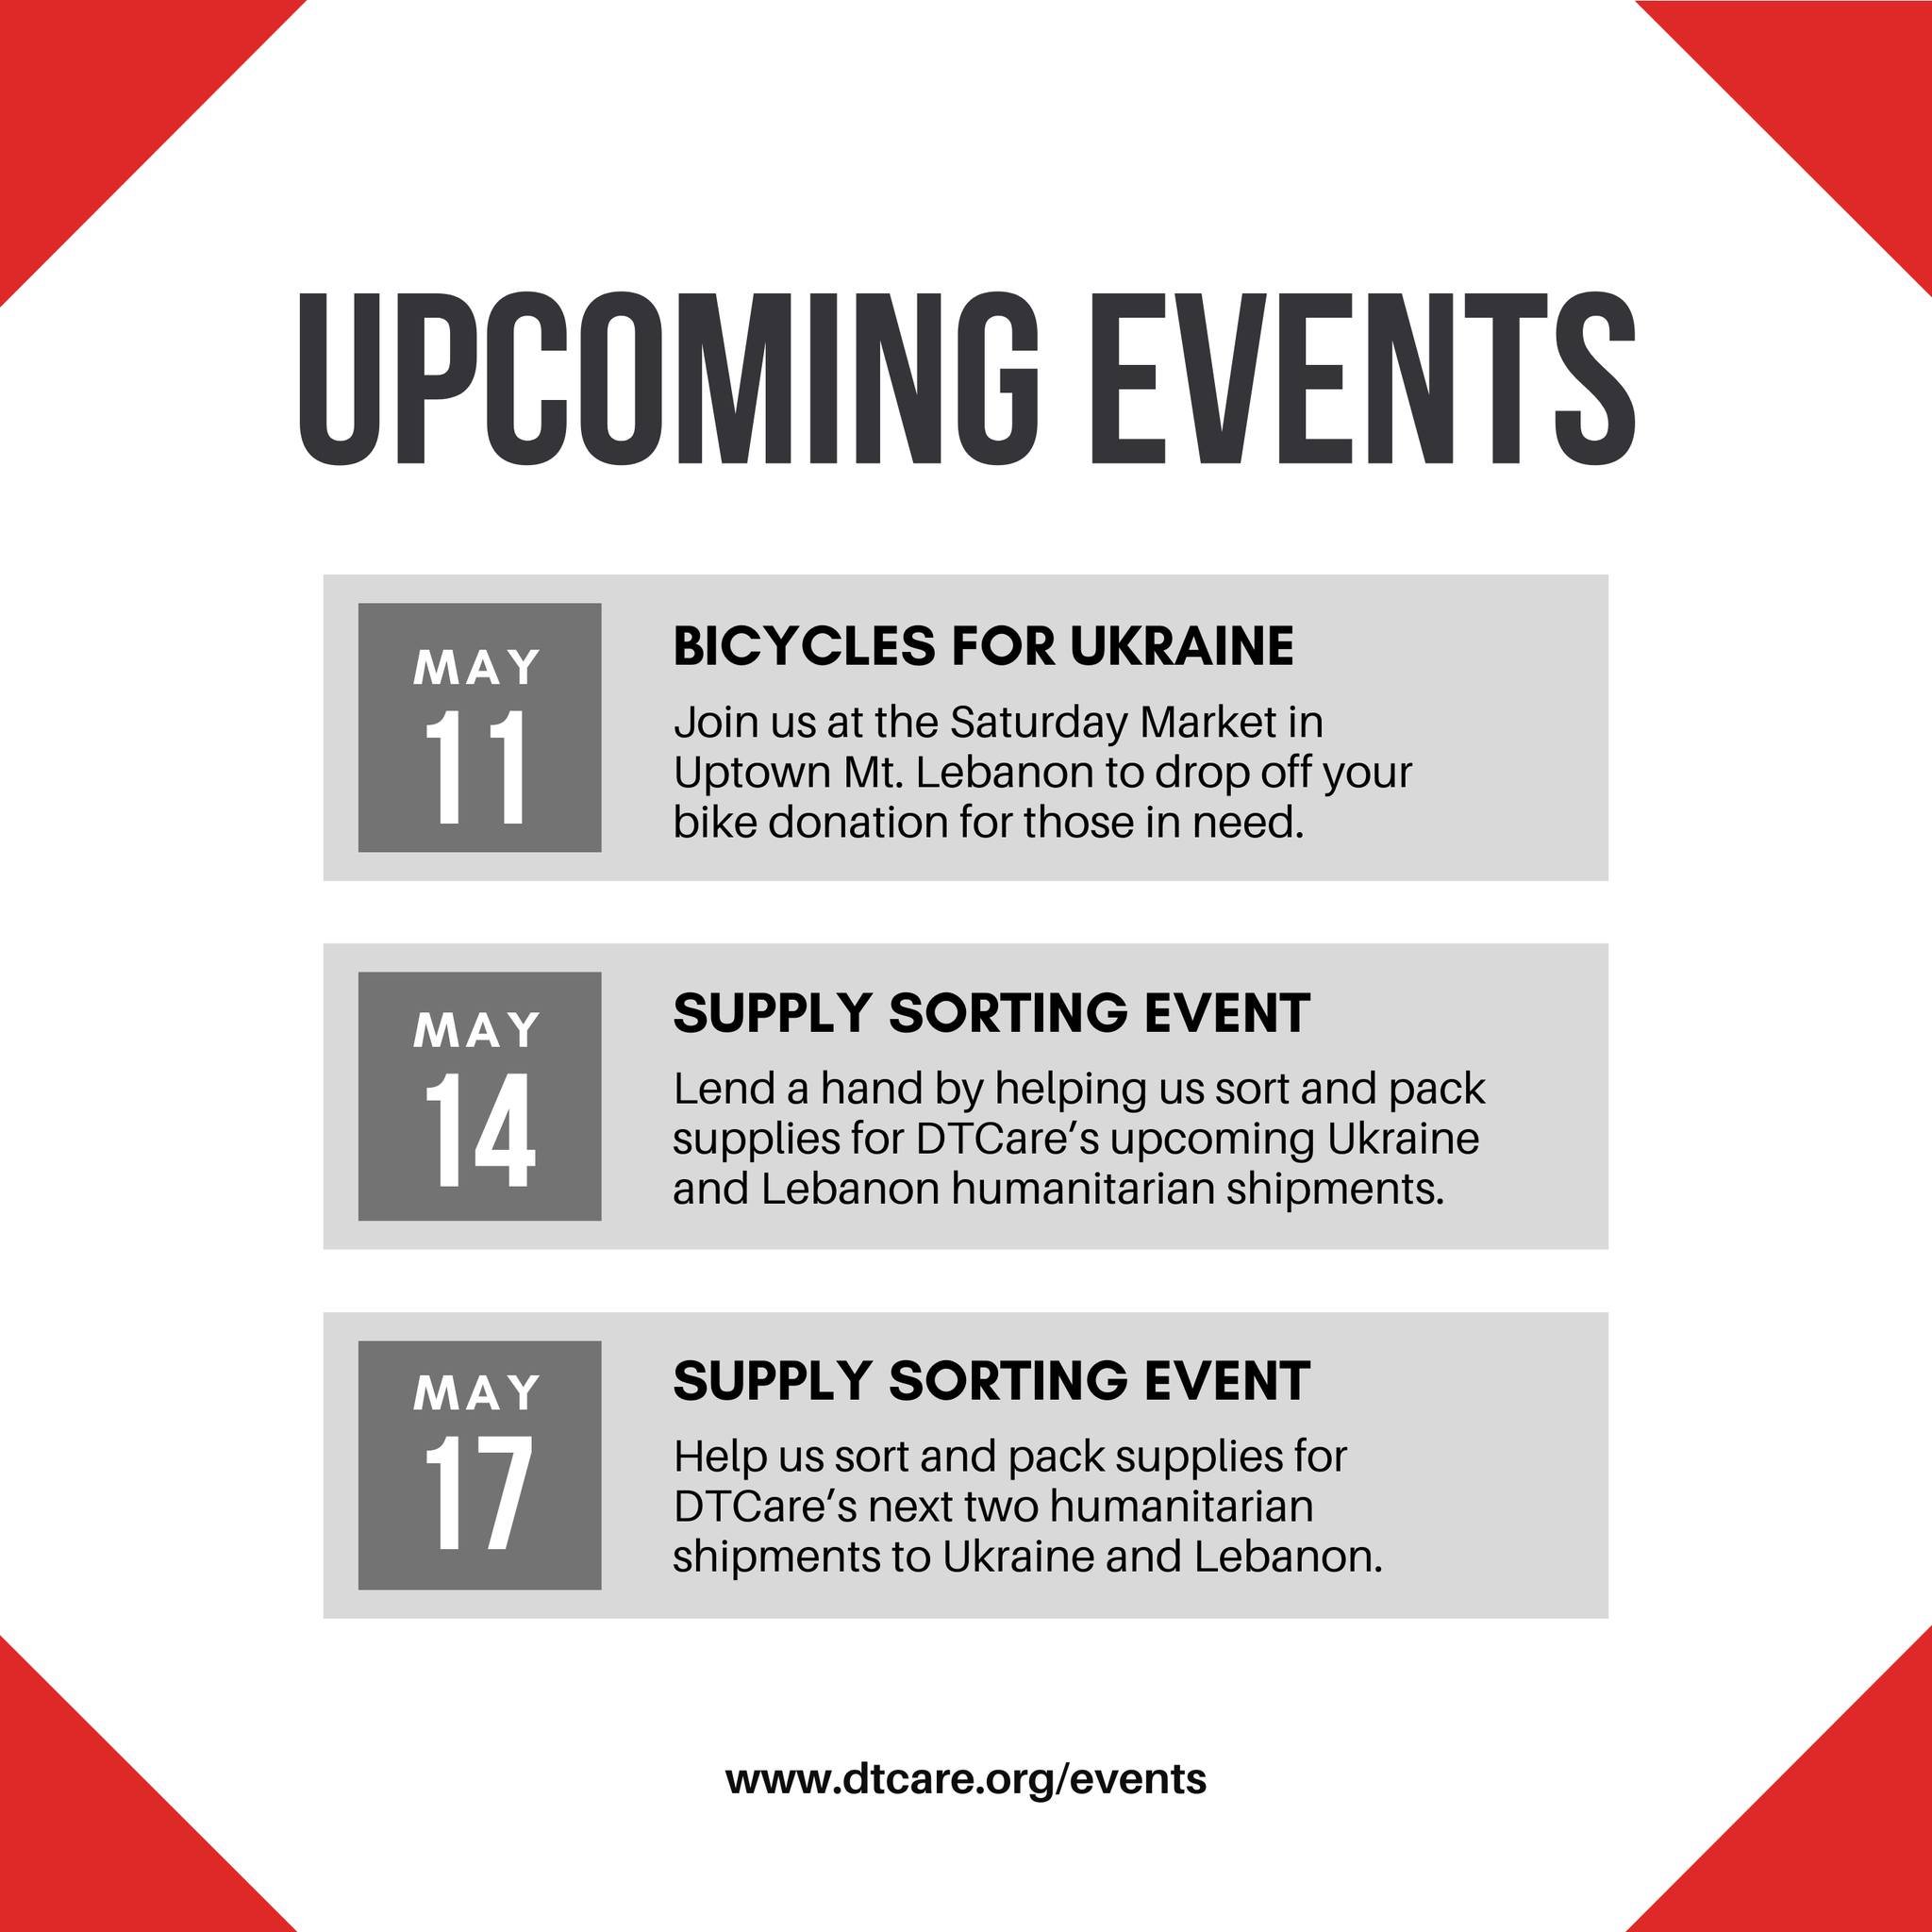 Looking for a meaningful way to make a difference? 🤝✨ Check out our upcoming events for ways you can get involved in May:

Bicycles for Ukraine: May 11 - 9am to 11am
Join us at the Saturday Market on the lawn in front of Citizen's Bank at 712 Washin